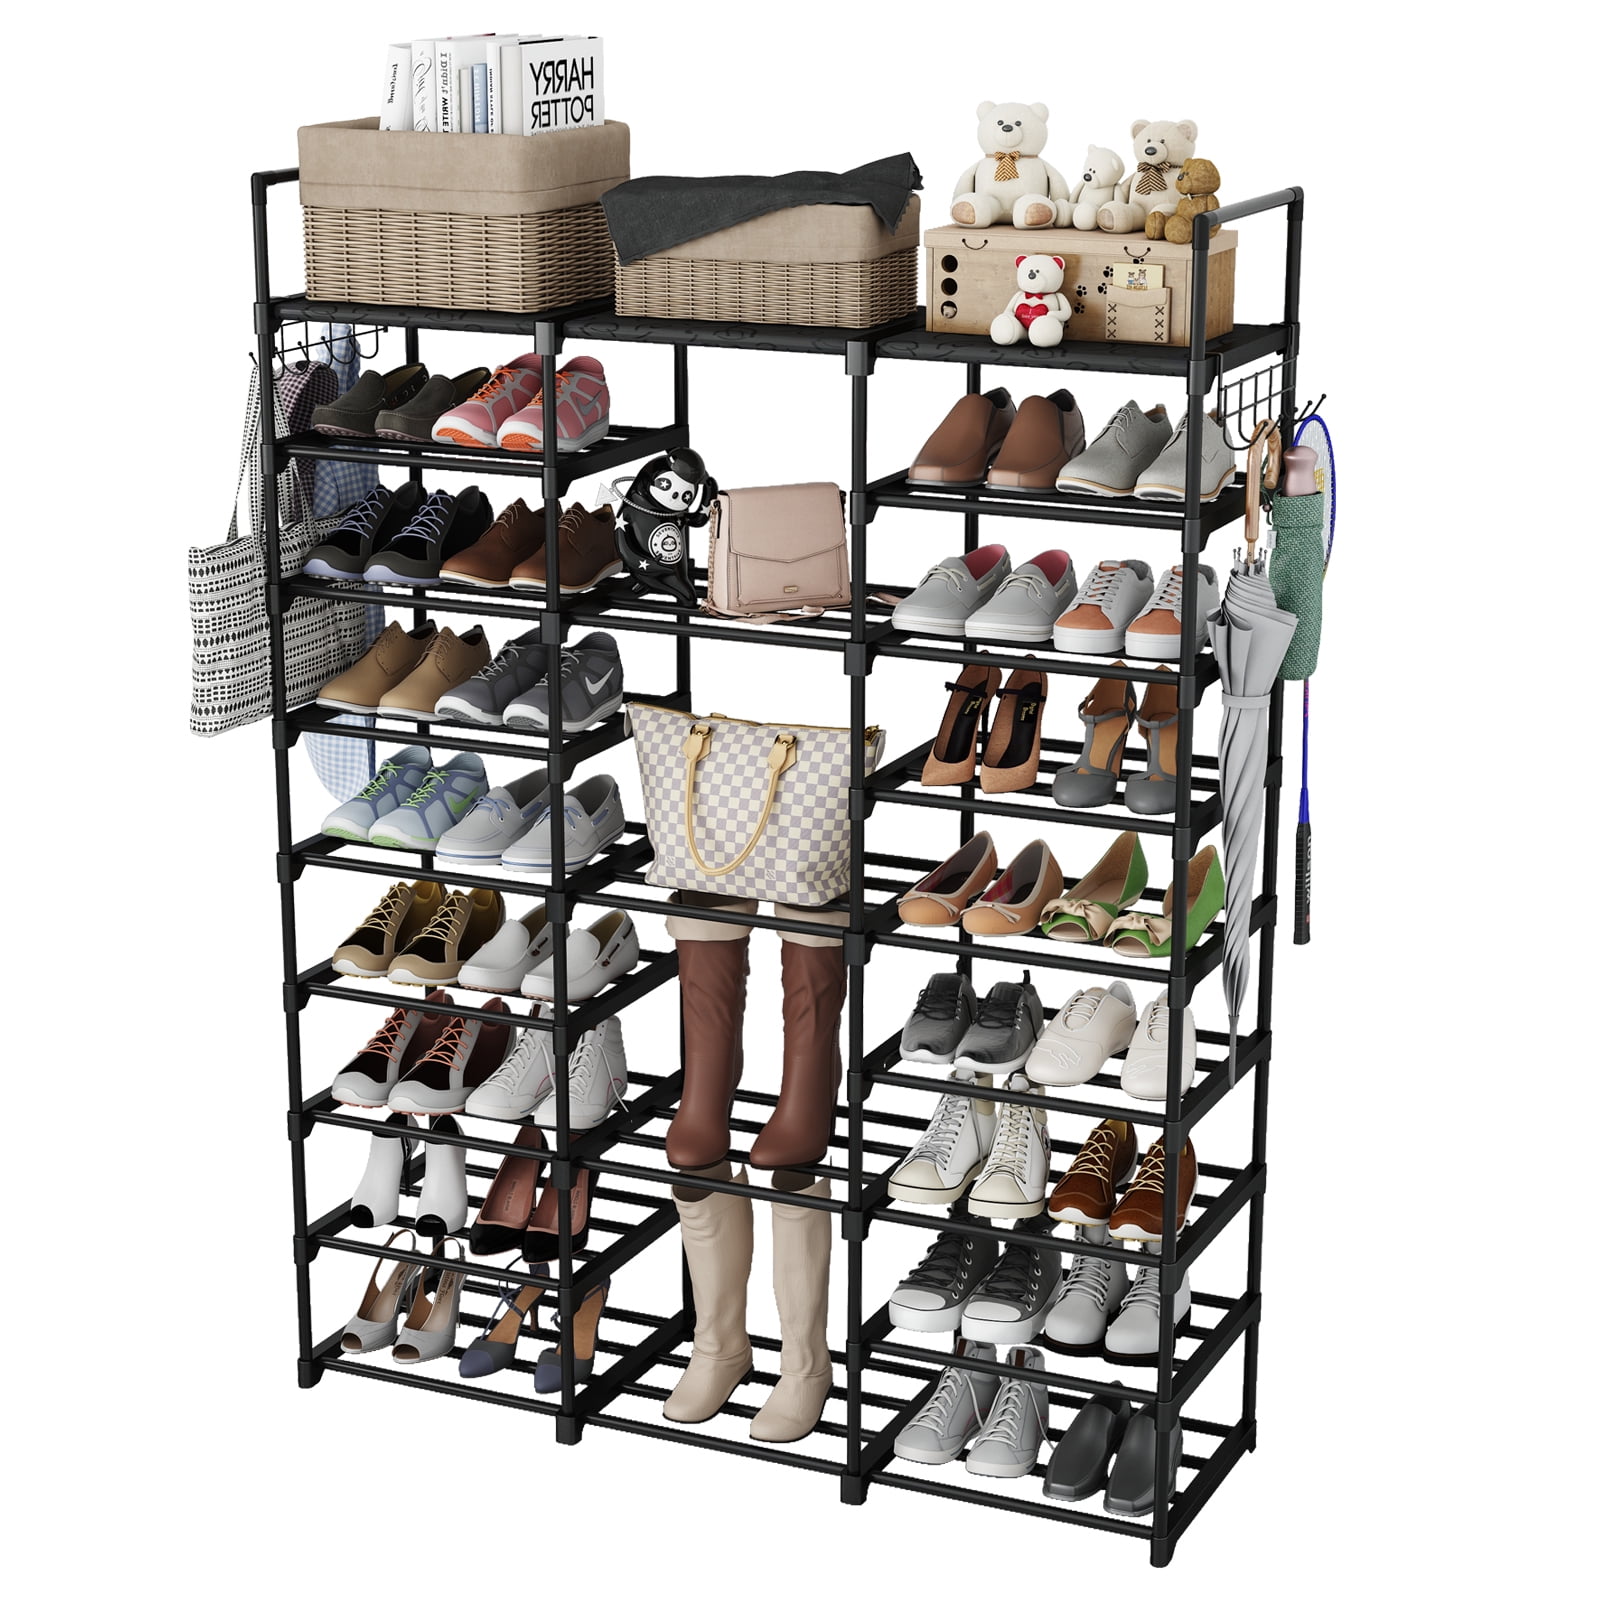 MB-THISTAR 50 Pair 10 Tier Space Saving Storage Organizer Shoes Tower Rack Free Standing 